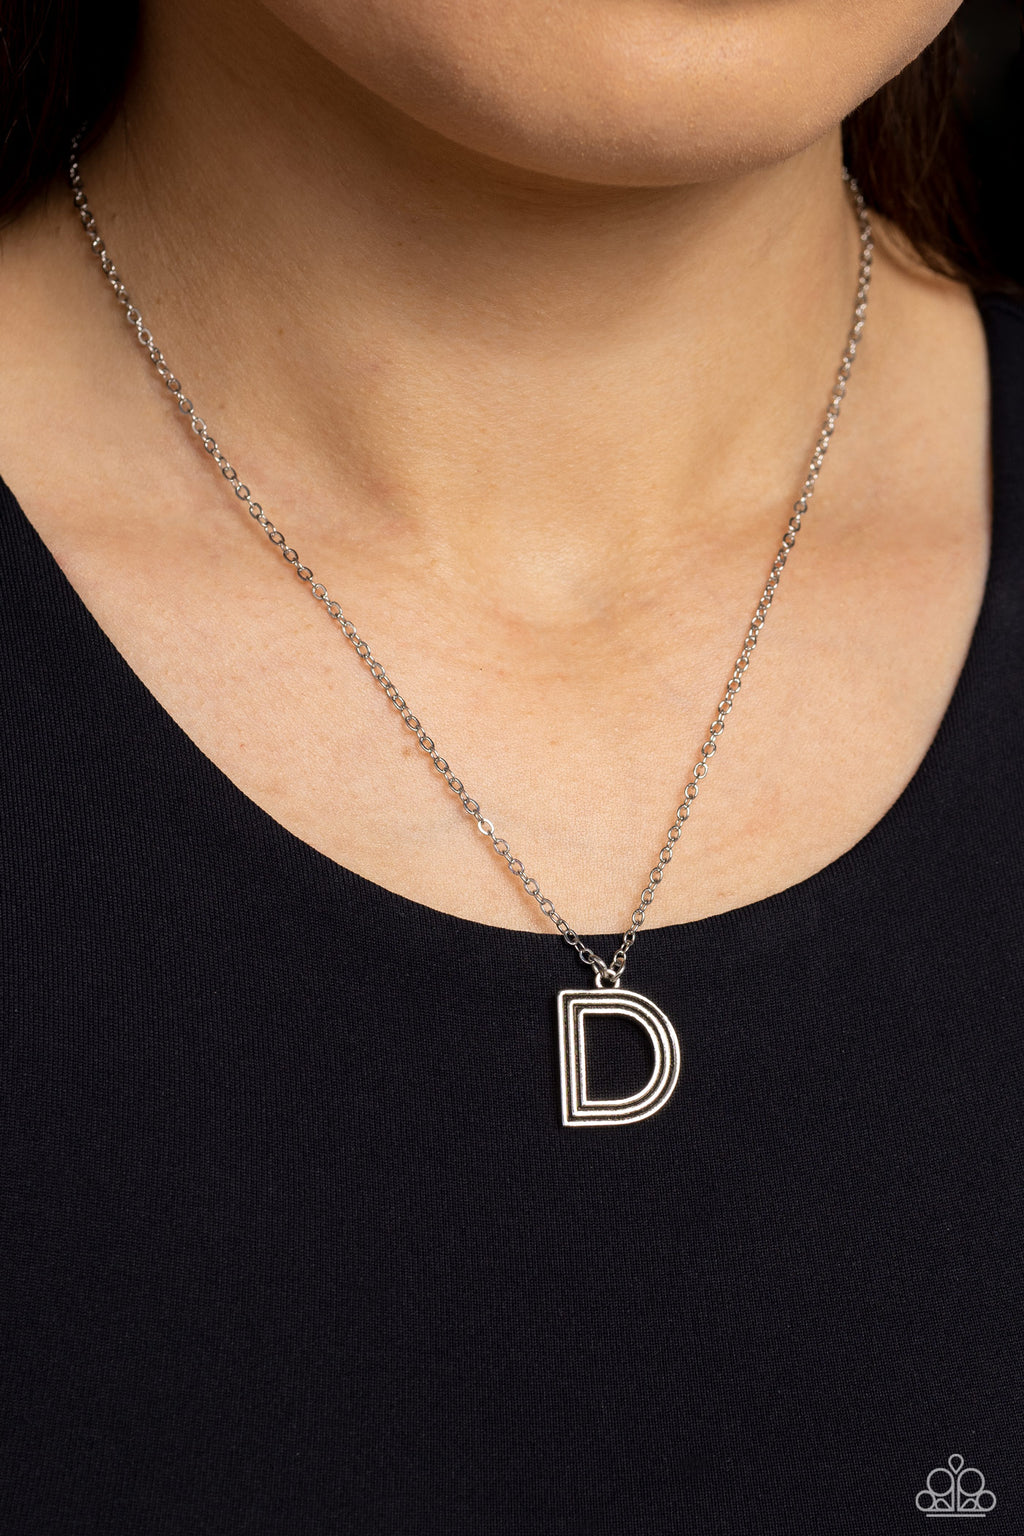 Leave Your Initials - Silver - D Necklace - Paparazzi Accessories